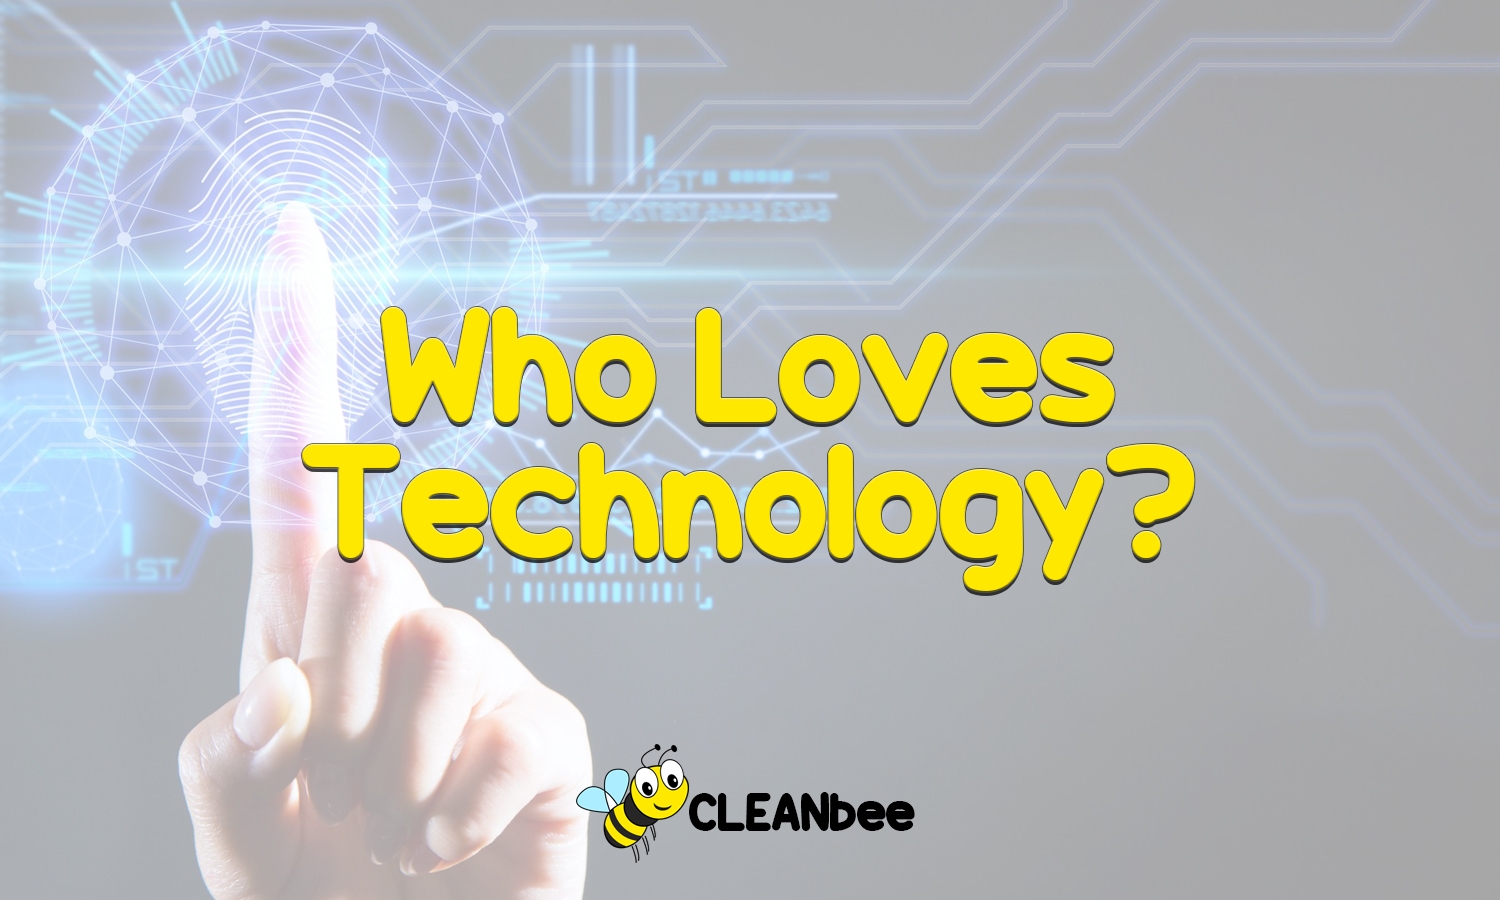 Who Loves Technology?